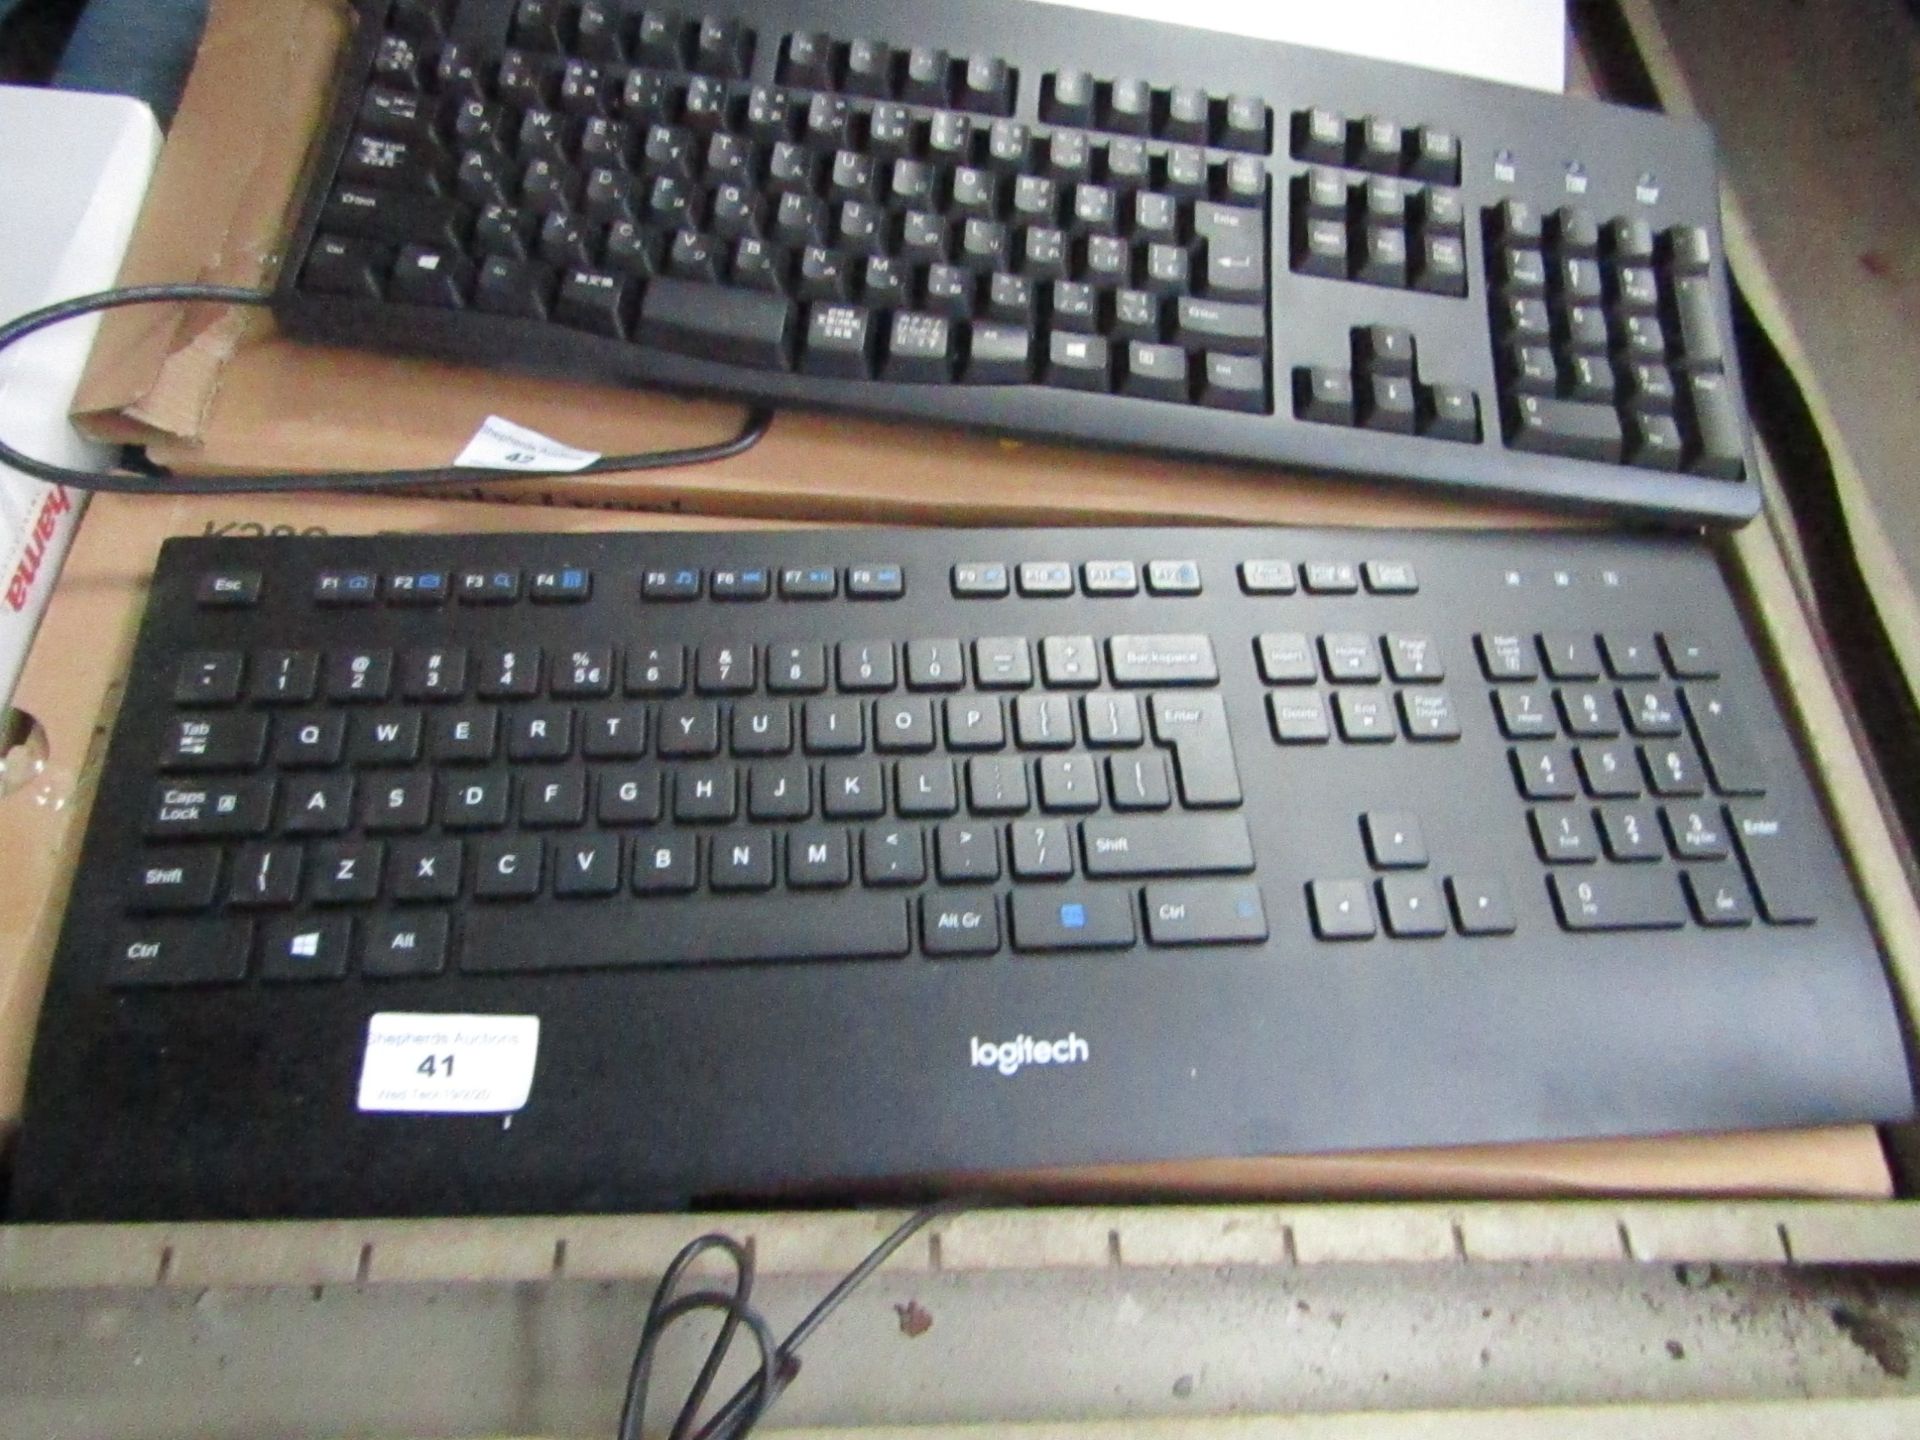 Logitech keyboard, untested and boxed.